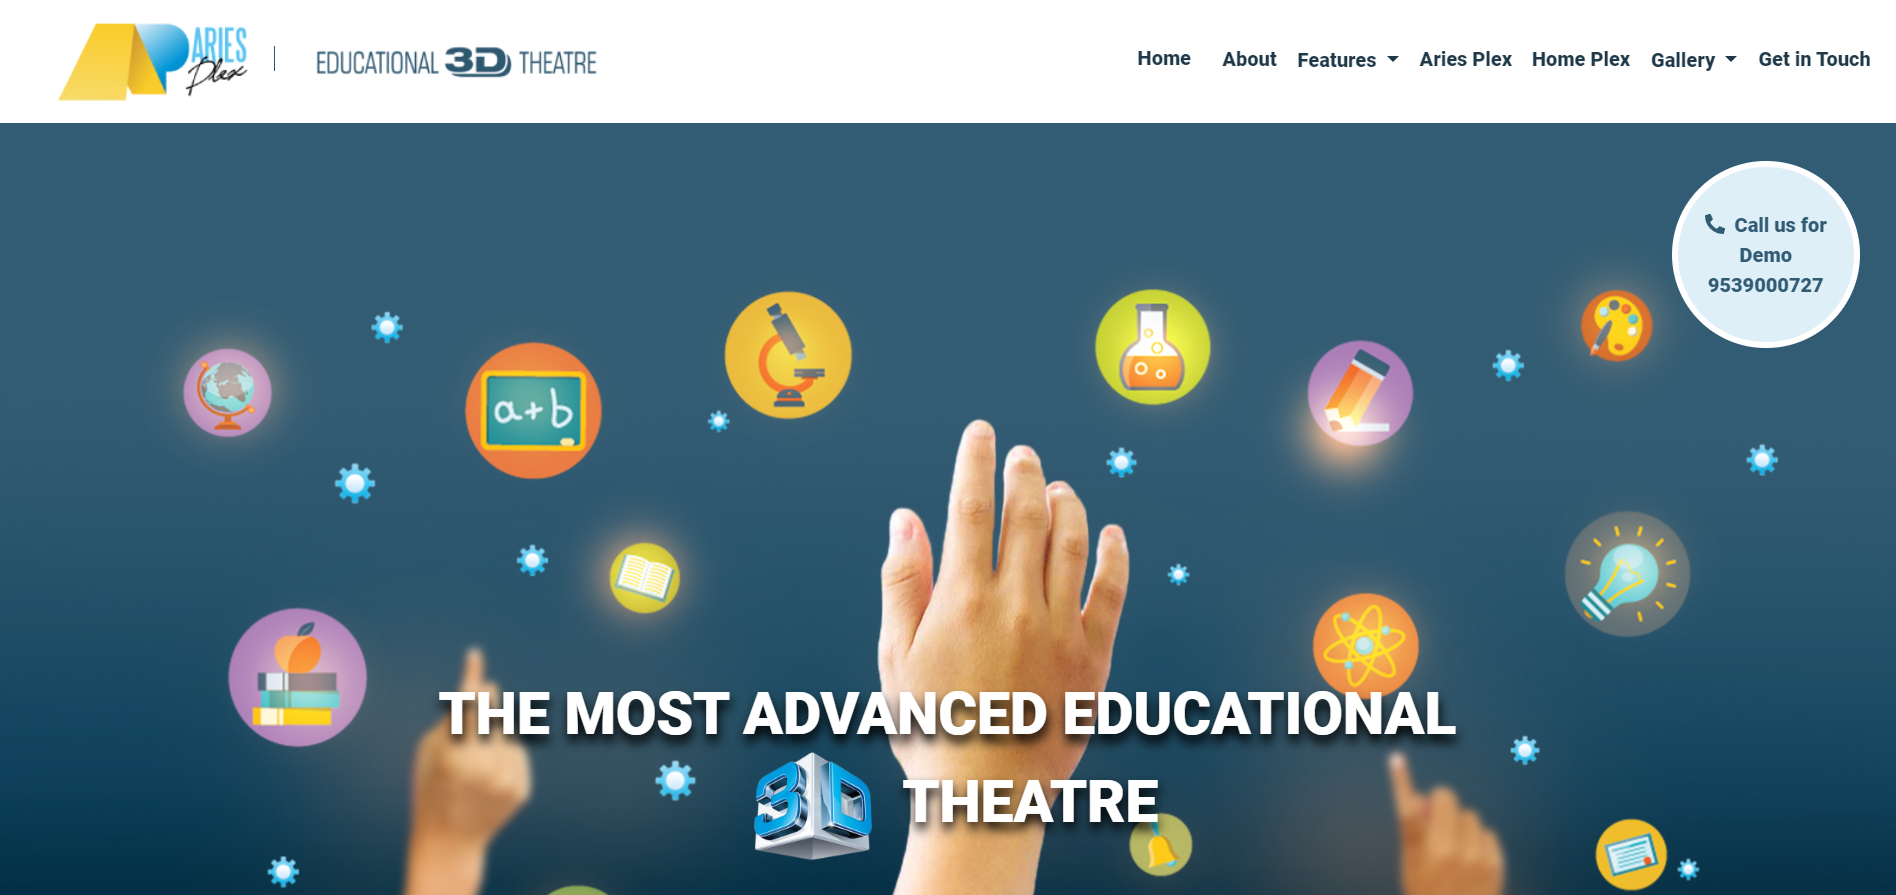 Aries Educational 3D Theatre